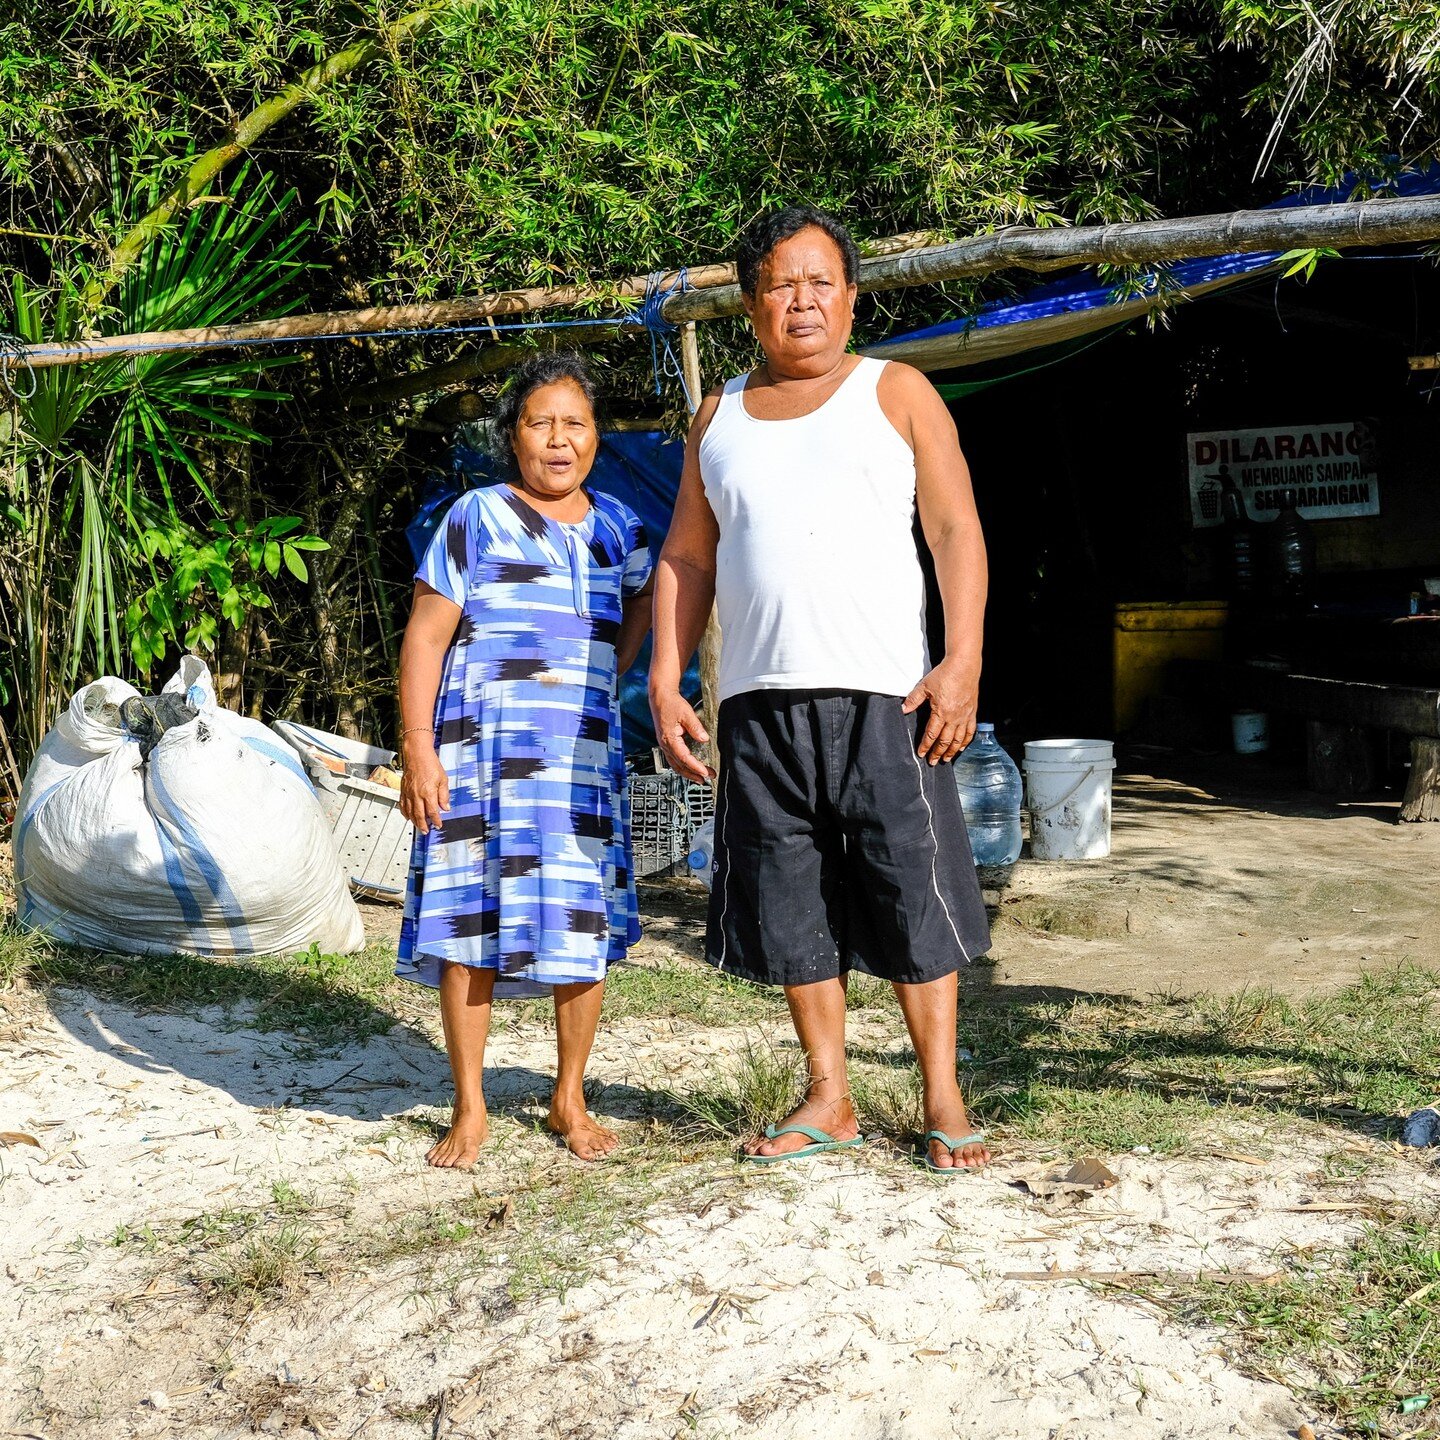 &quot;G-Land is haunted. Everyone here believes it,&quot; says Pak Samun, a local fisherman. 

&quot;It is the belief of the Javanese people. We believe that there are spirits in the jungle, and people have held those beliefs for a long time.&quot;

